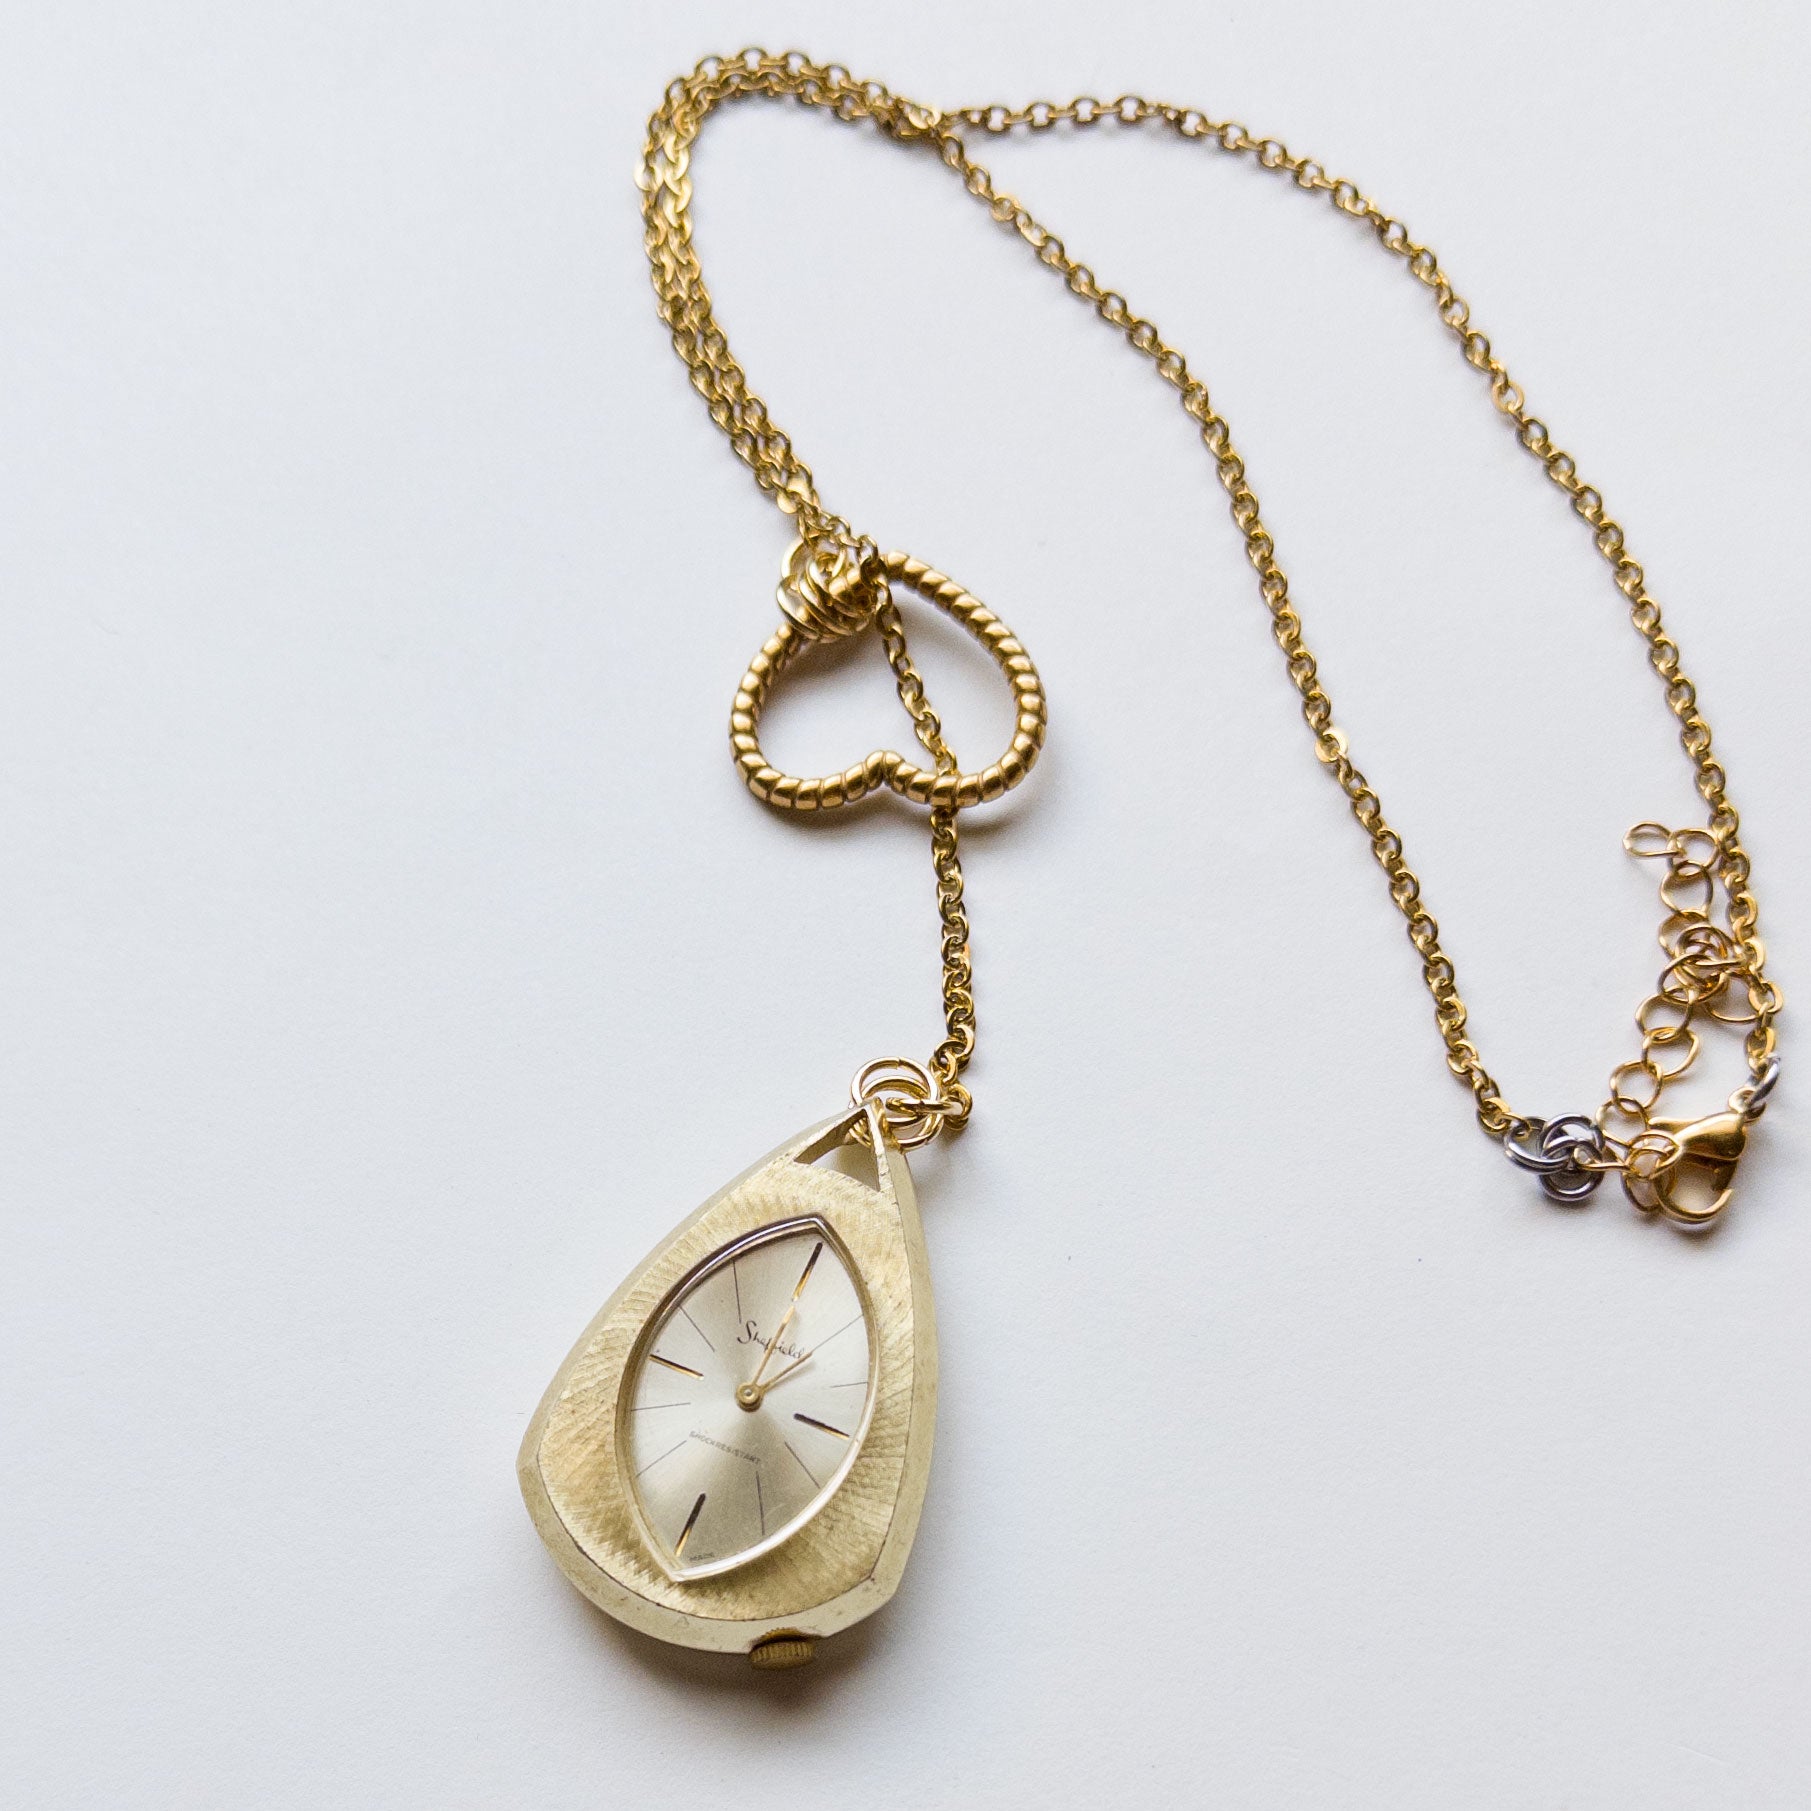 vintage watch necklace with heart detail/ watch pendant